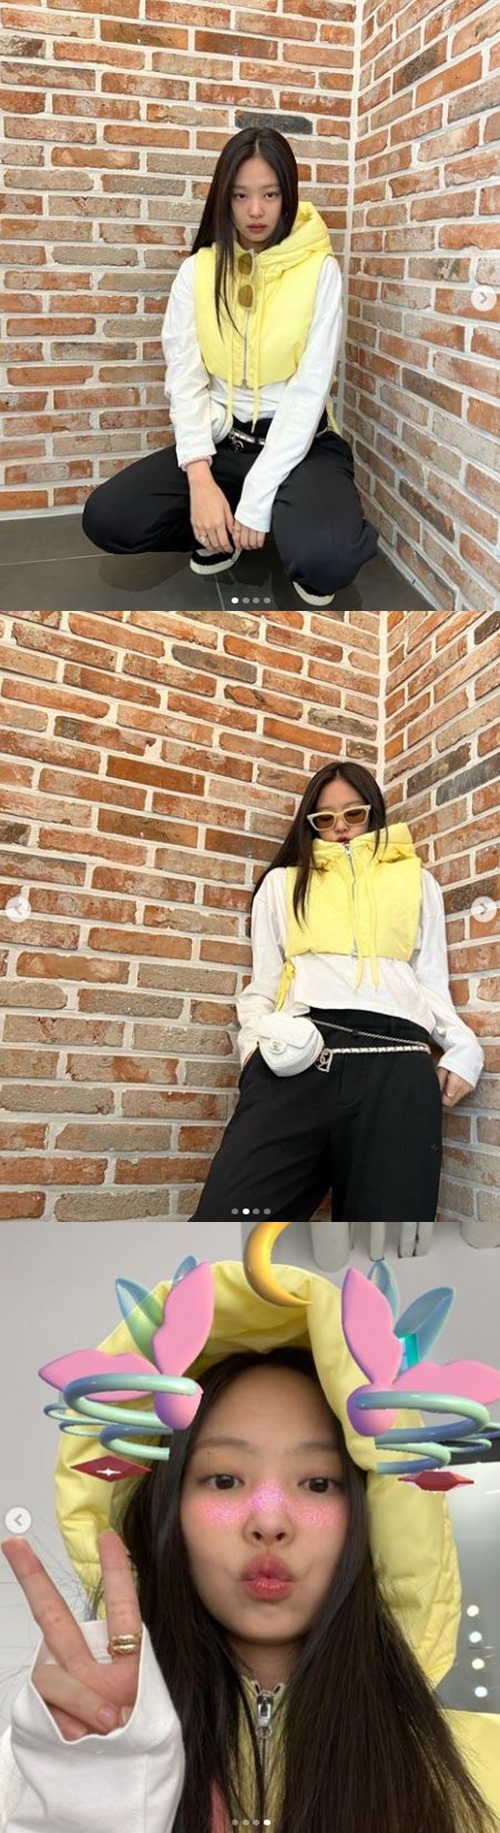 BLACKPINK Jenny Kim flaunts cutenessJenny Kim posted an article and a photo on her instagram on the afternoon of the 5th.Inside the picture is his appearance of a hip fashion.Sweggy pose, Jenny Kim added a chic charm with a dotty look.In another photo, he was seen standing against the wall.In addition, Jenny Kim also unveiled a lovely charm selfie taken using a filter.He had his lips out, and he had a cute, cute charm, and he had a nice, sleek look.